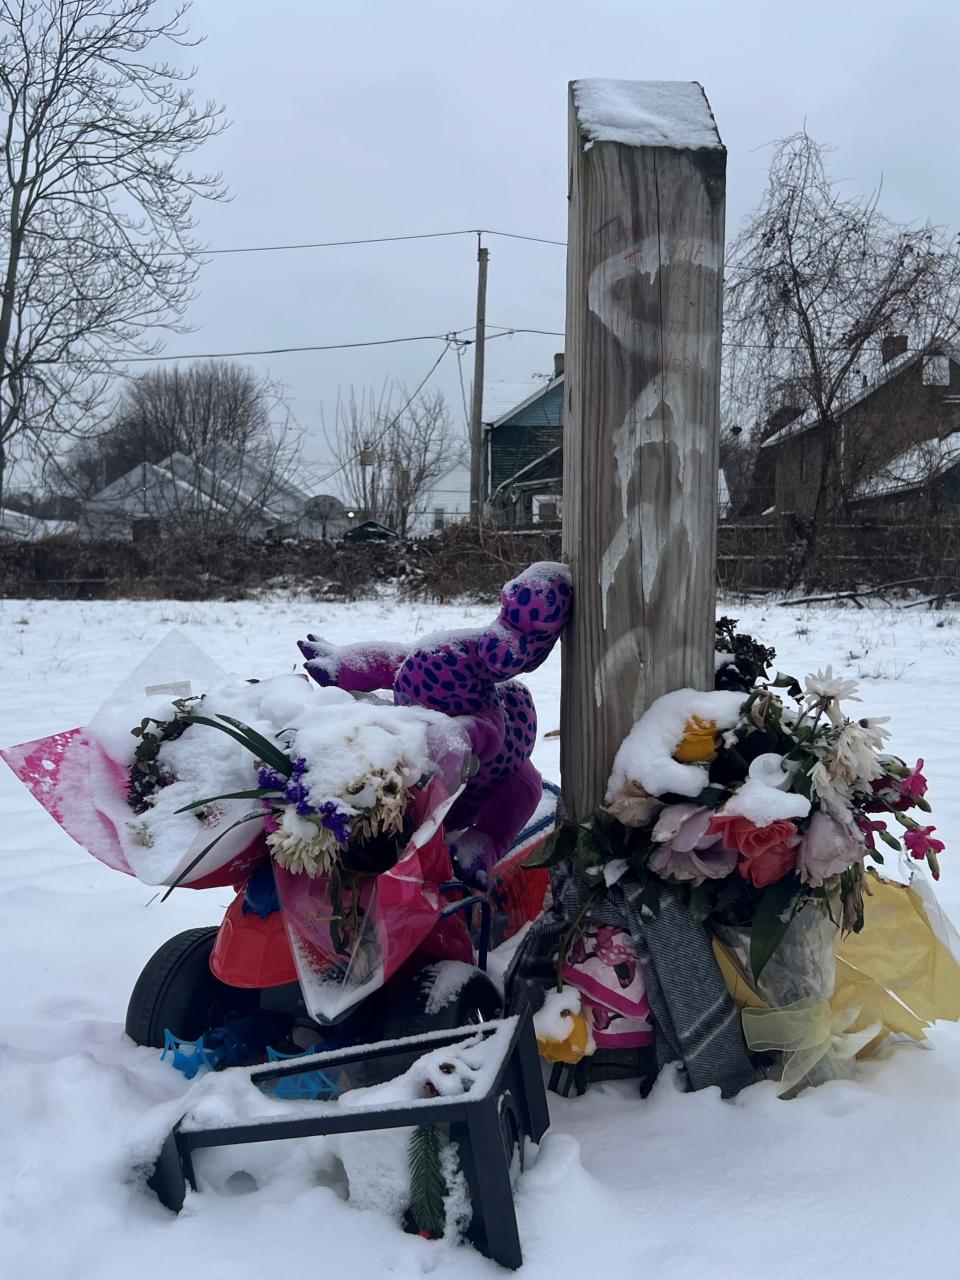 A wooden beam near the spot where Todd Novick was shot and killed by police has become a gravestone of sorts. Someone carved his name into the post with a thin red pen. "RIP my love," the message reads.